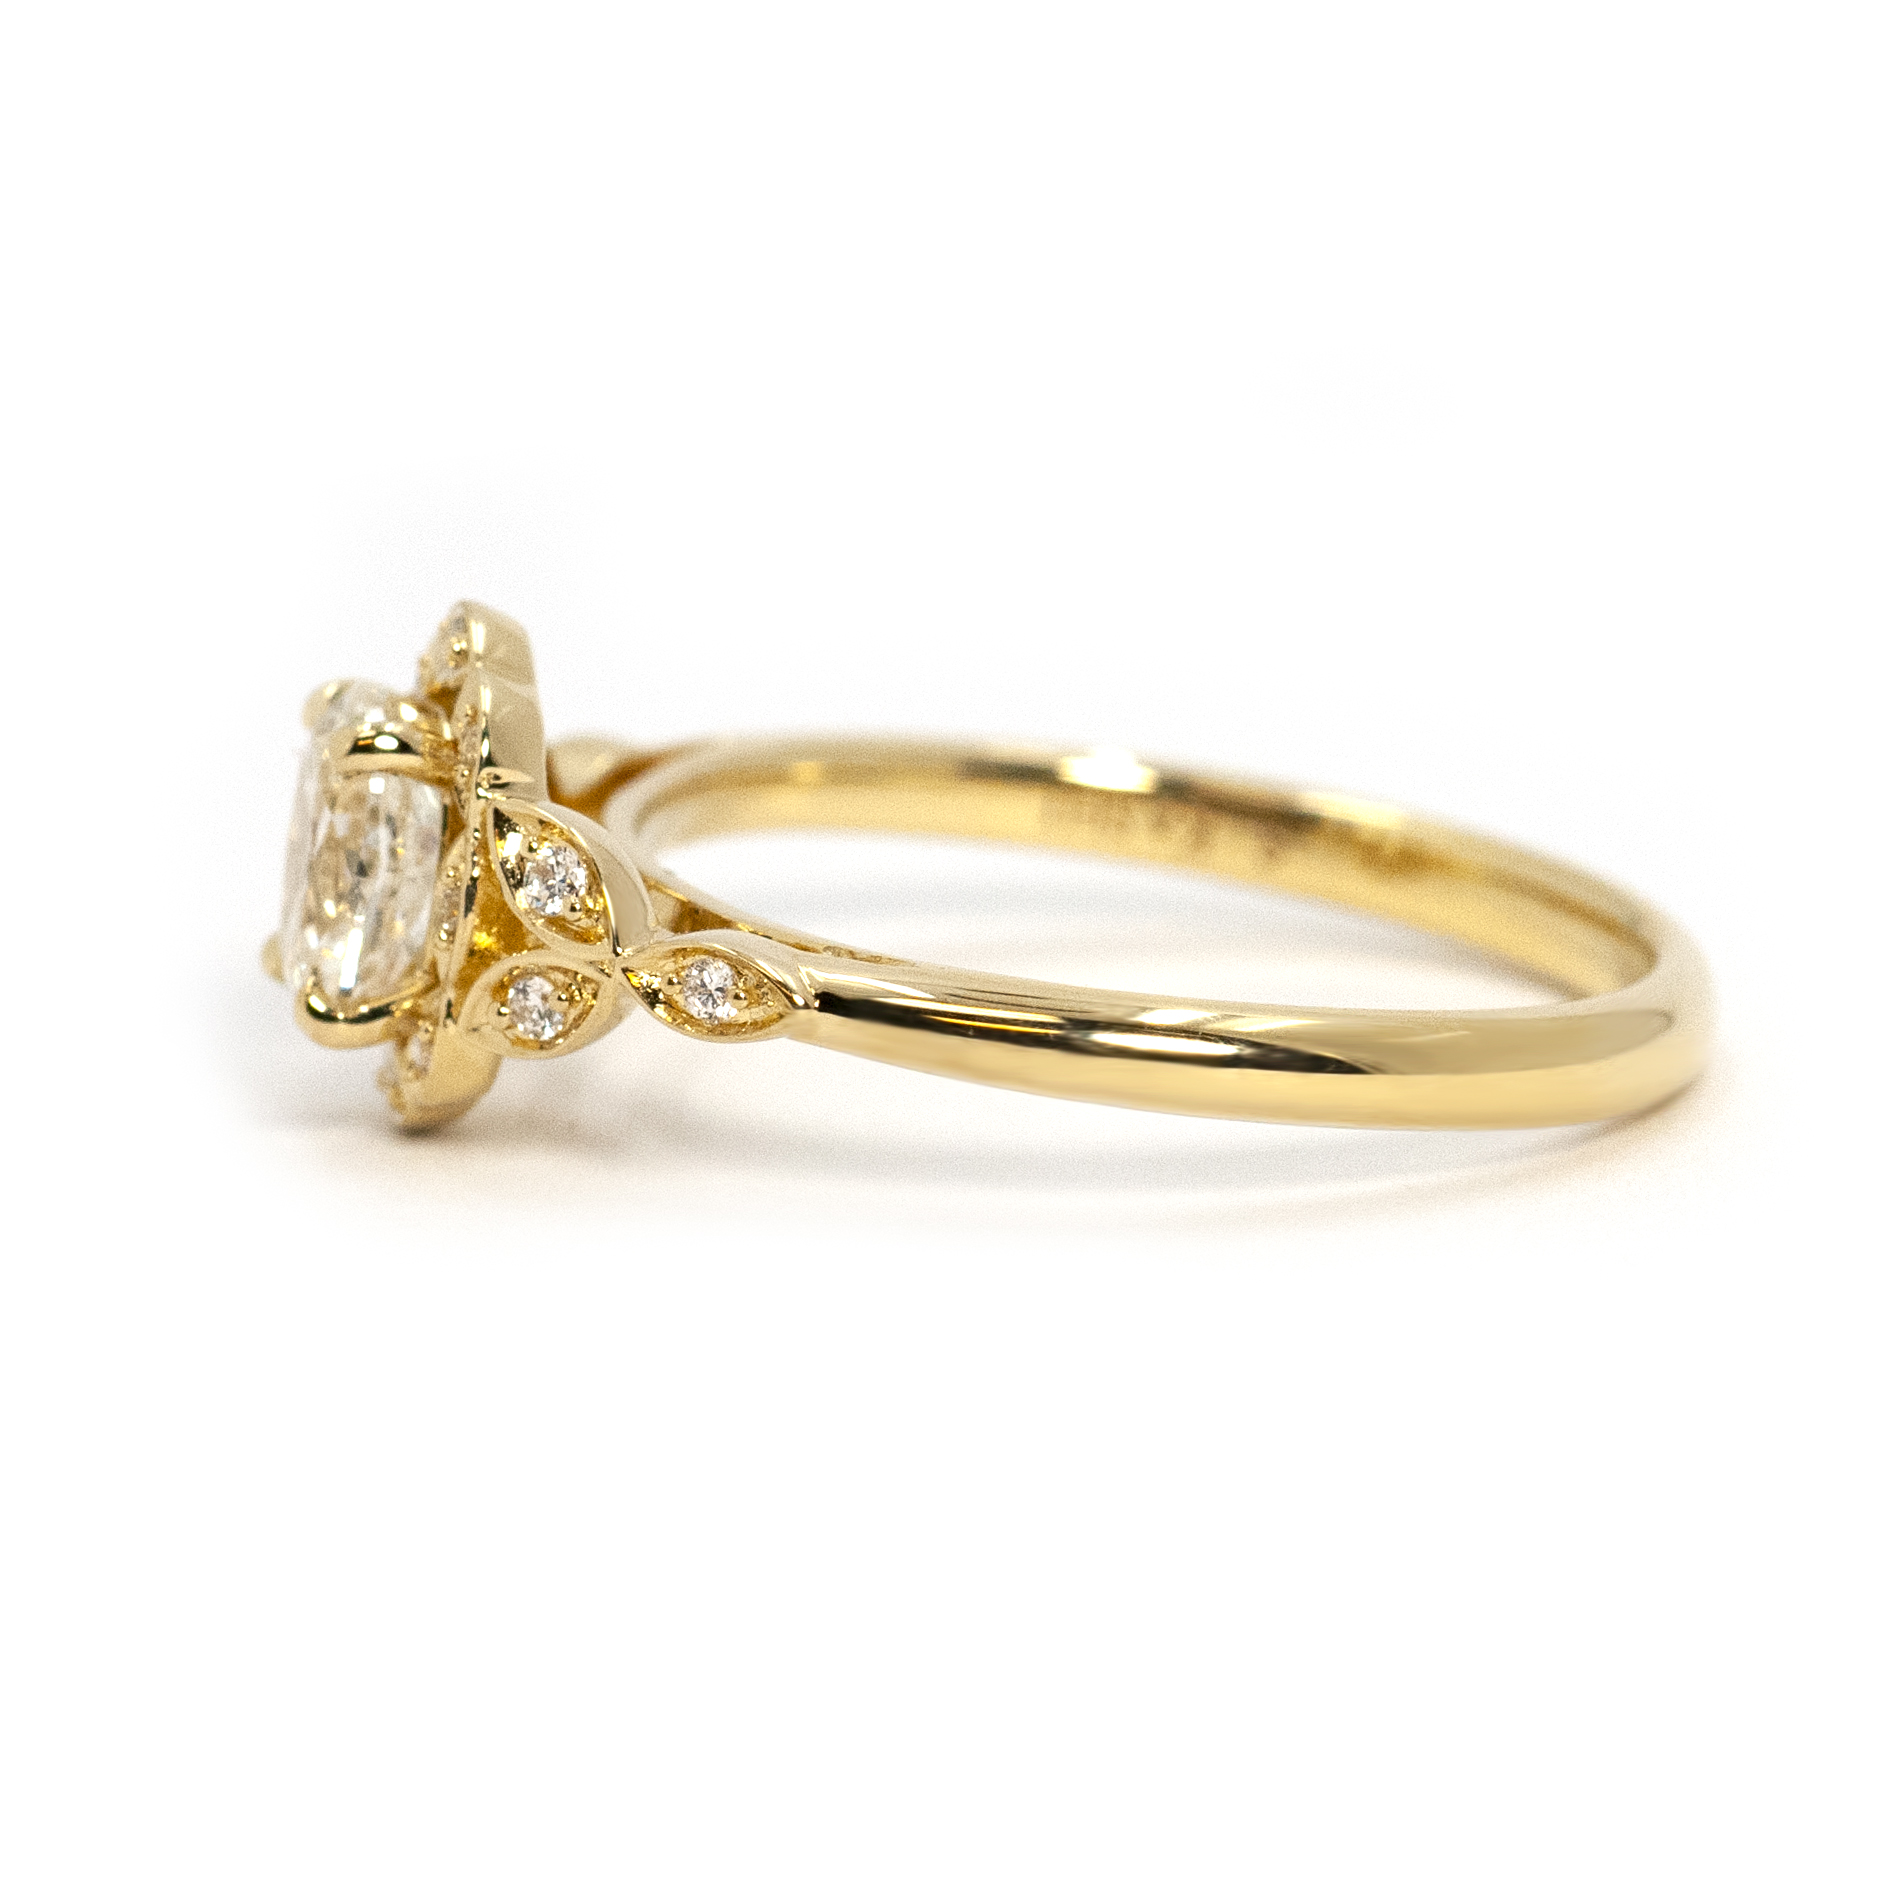 Vintage-Detailed Oval Diamond Ring - Dale’s Jewelers